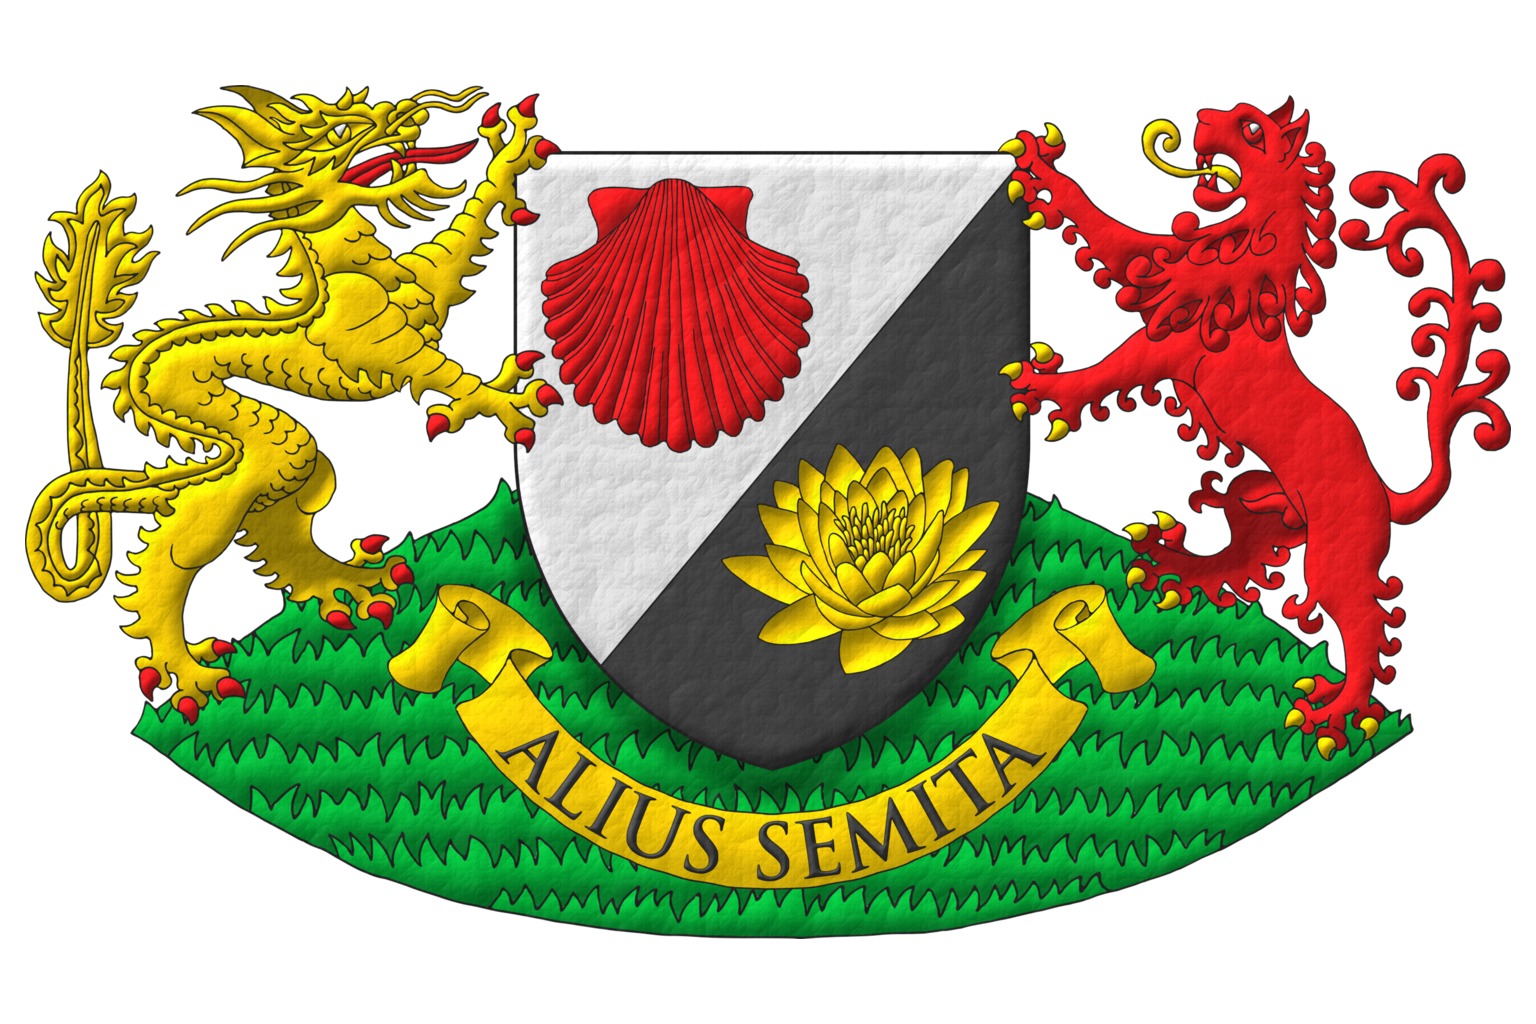 Per bend sinister, Argent an escallop Gules and Sable a lotus flower Or. Supporters: Dexter, a Chinese dragon rampant Or, armed and langued Gules; and sinister, a lion rampant Gules, armed and langued Or, terraced Vert.